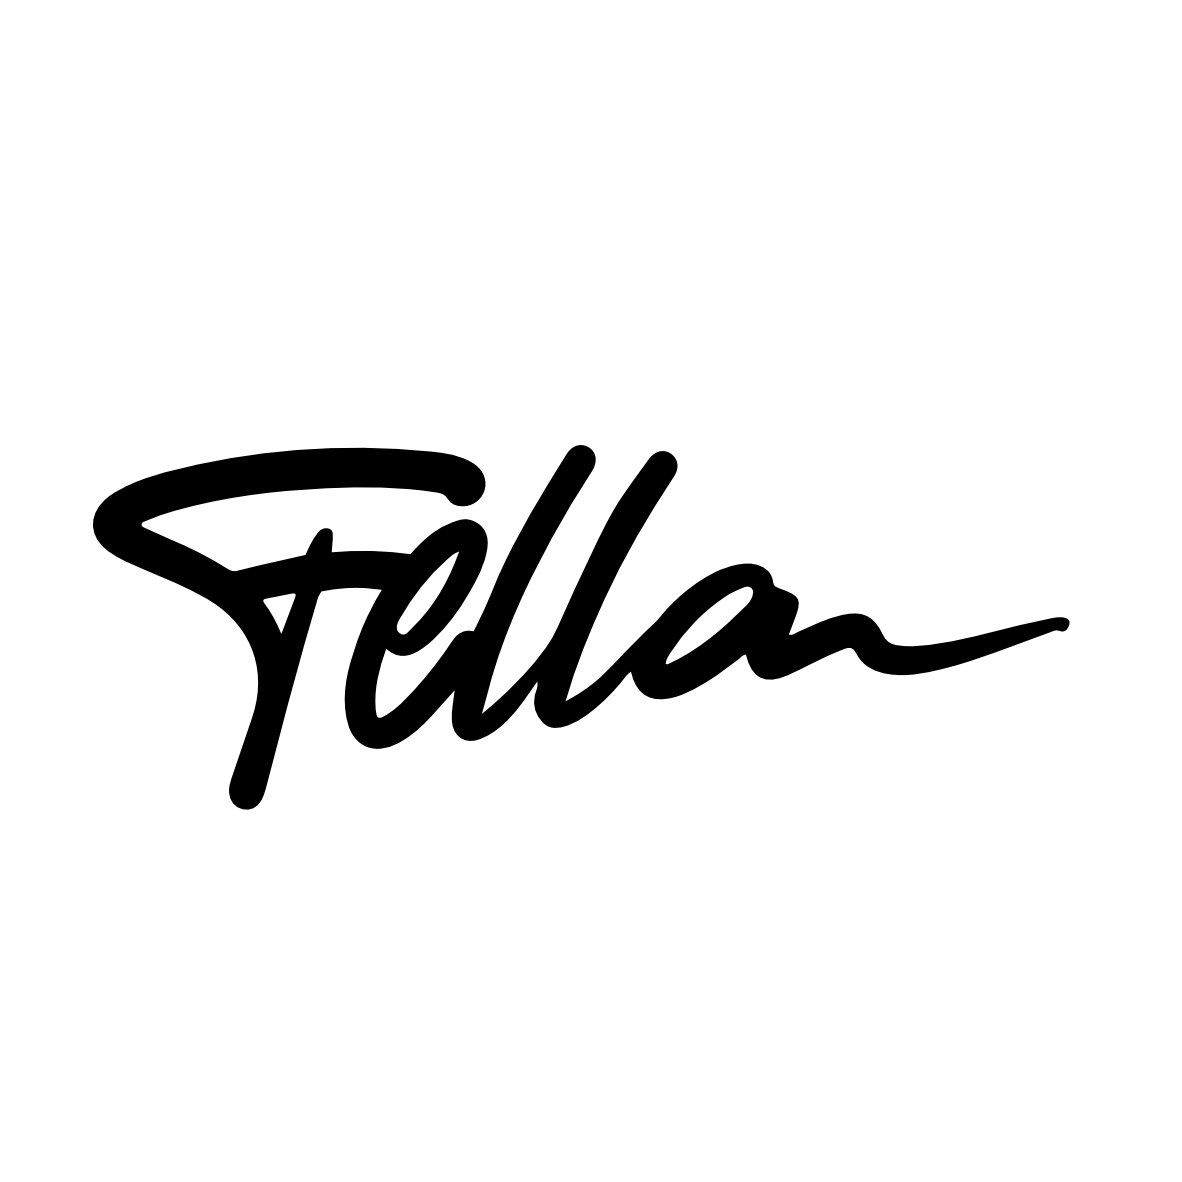 Elegant handwriting, resulting in the word "Fella", recorded by a videographer from Aschaffenburg.